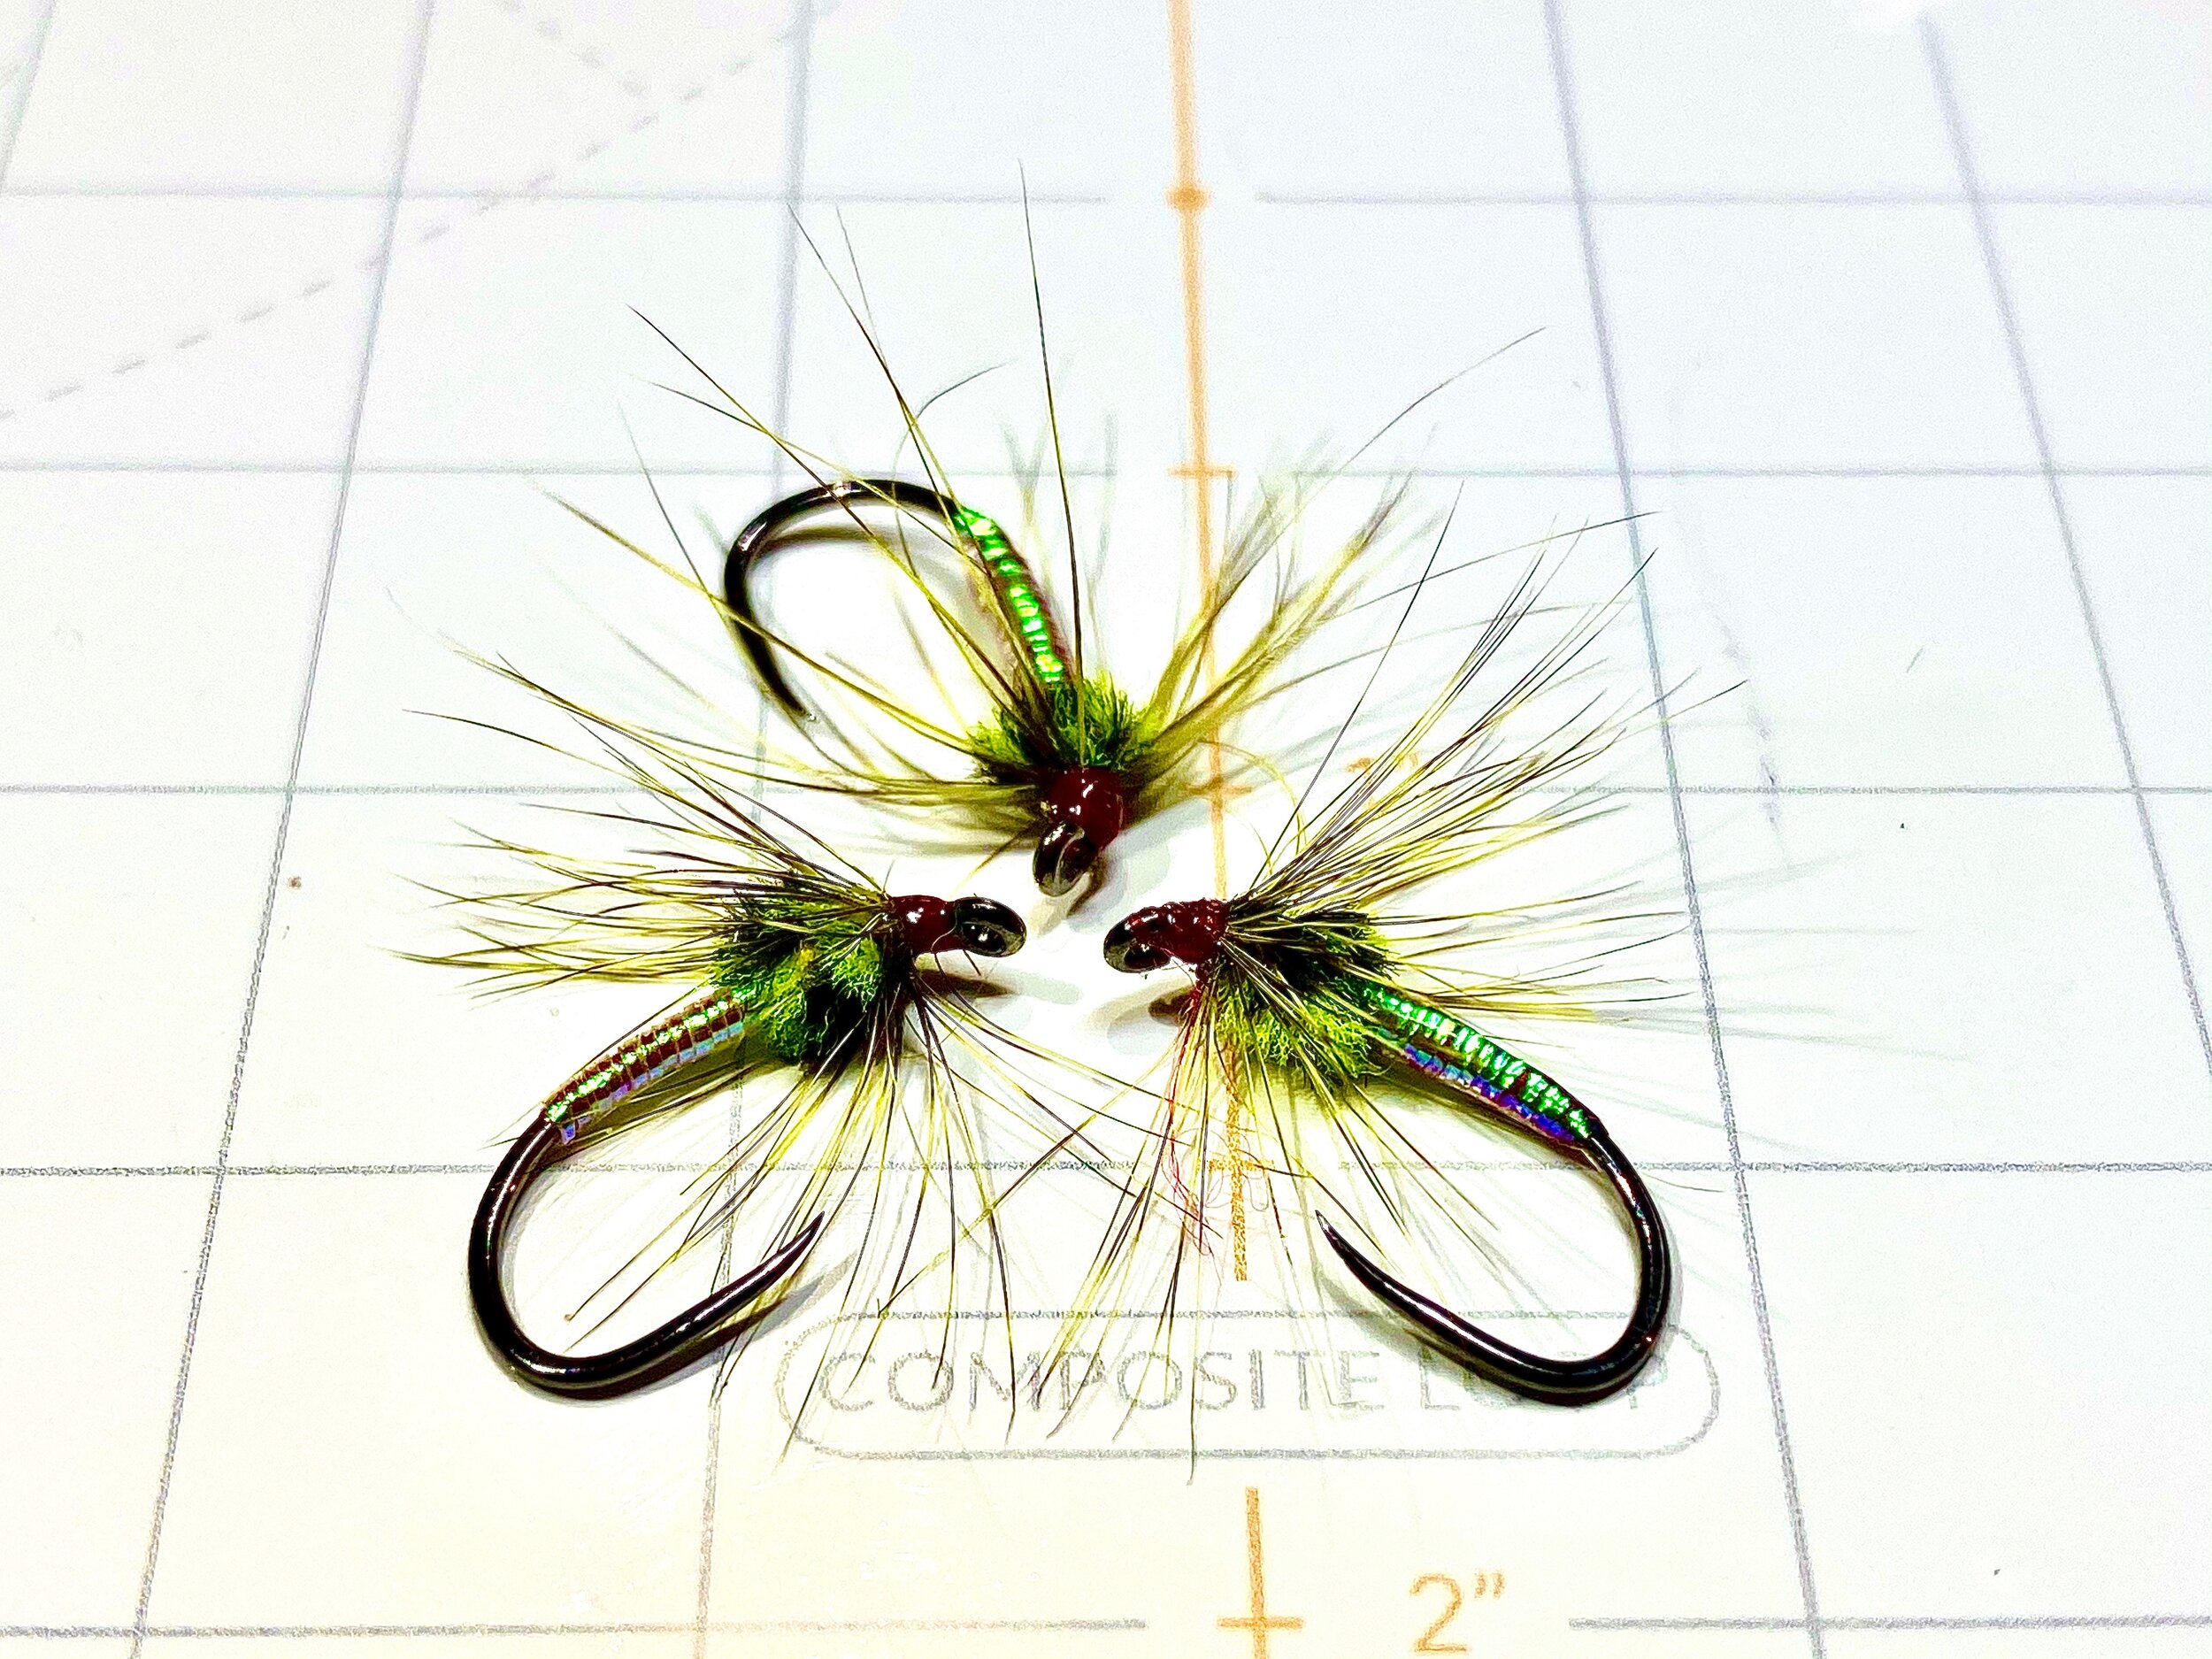 Resin Bodied Wet Flies Part II — Panfish On The Fly